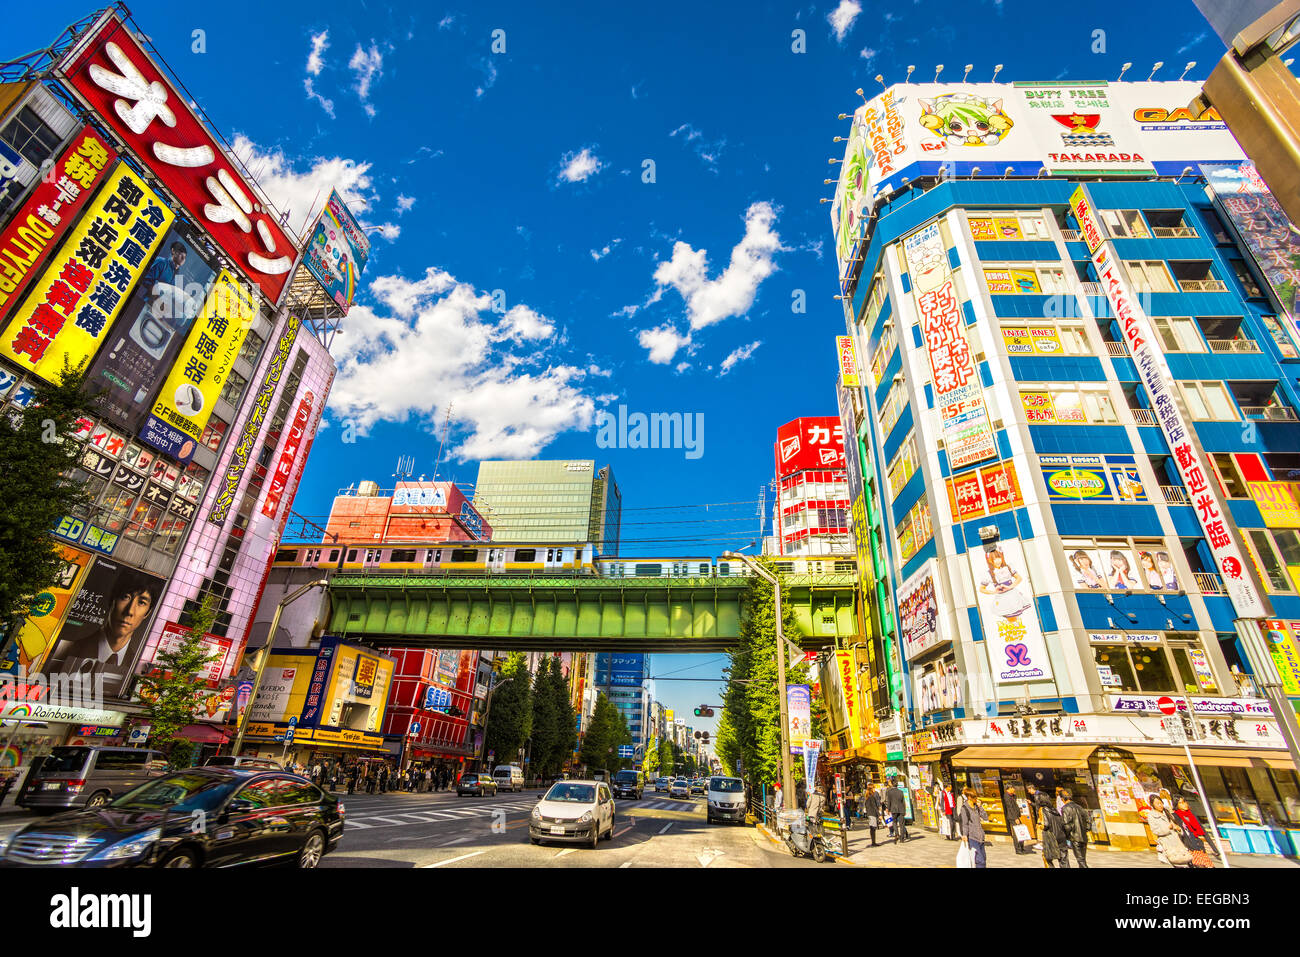 TOKYO - NOVEMBER 13: Akihabara district November13, 2014 in Tokyo, JP. The district is a major shopping area for electronic, com Stock Photo